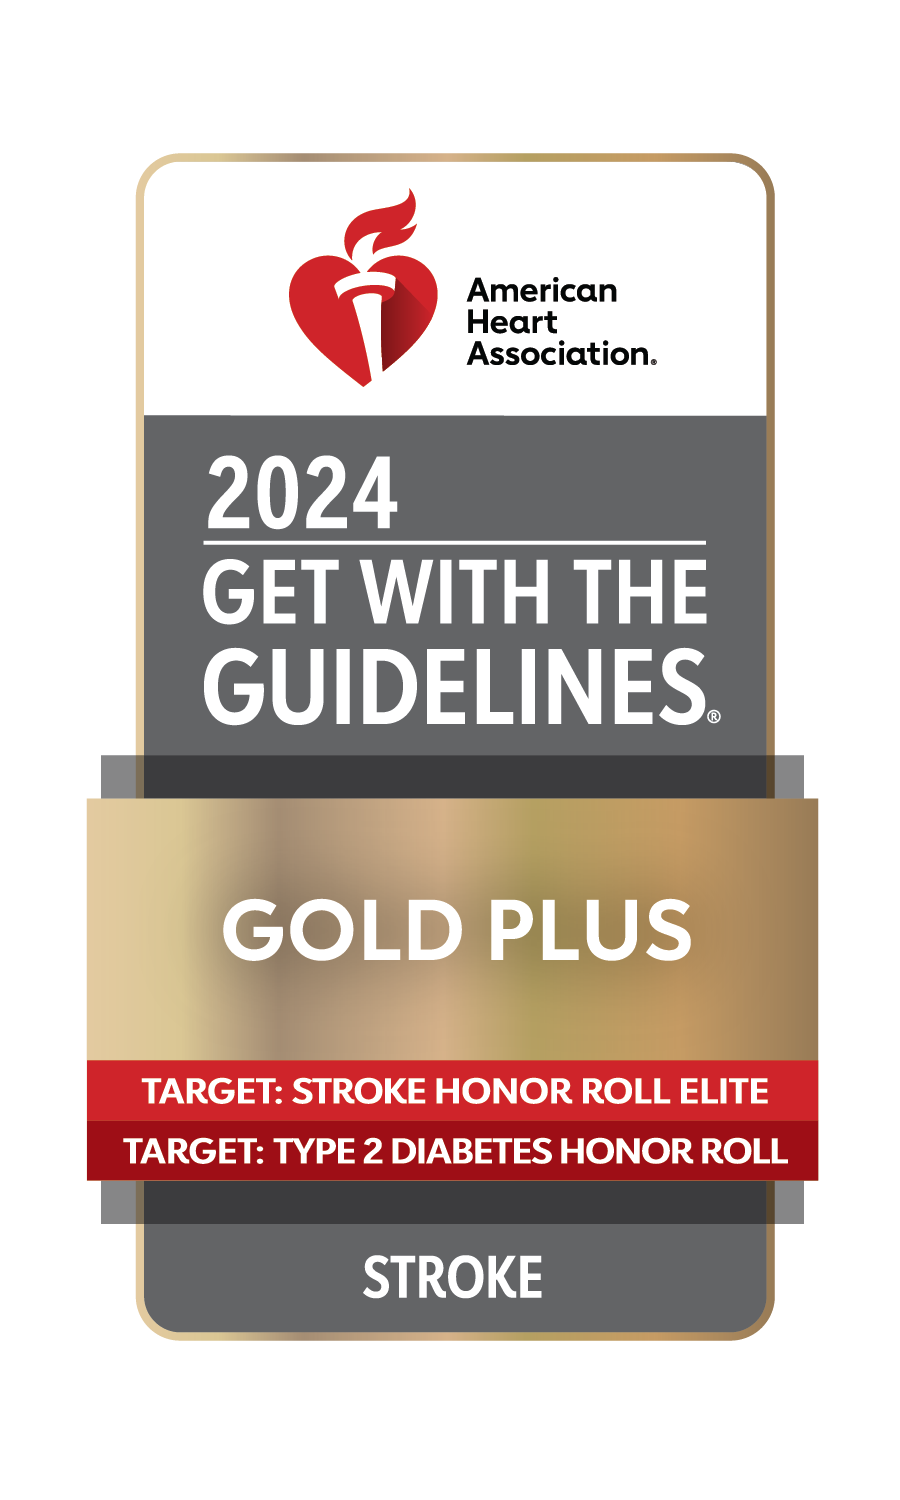 American Heart Association 2024 Get With the Guidelines. Gold Plus Target: Stroke Honor Roll Target: Type 2 Diabetes Honor Roll Stroke